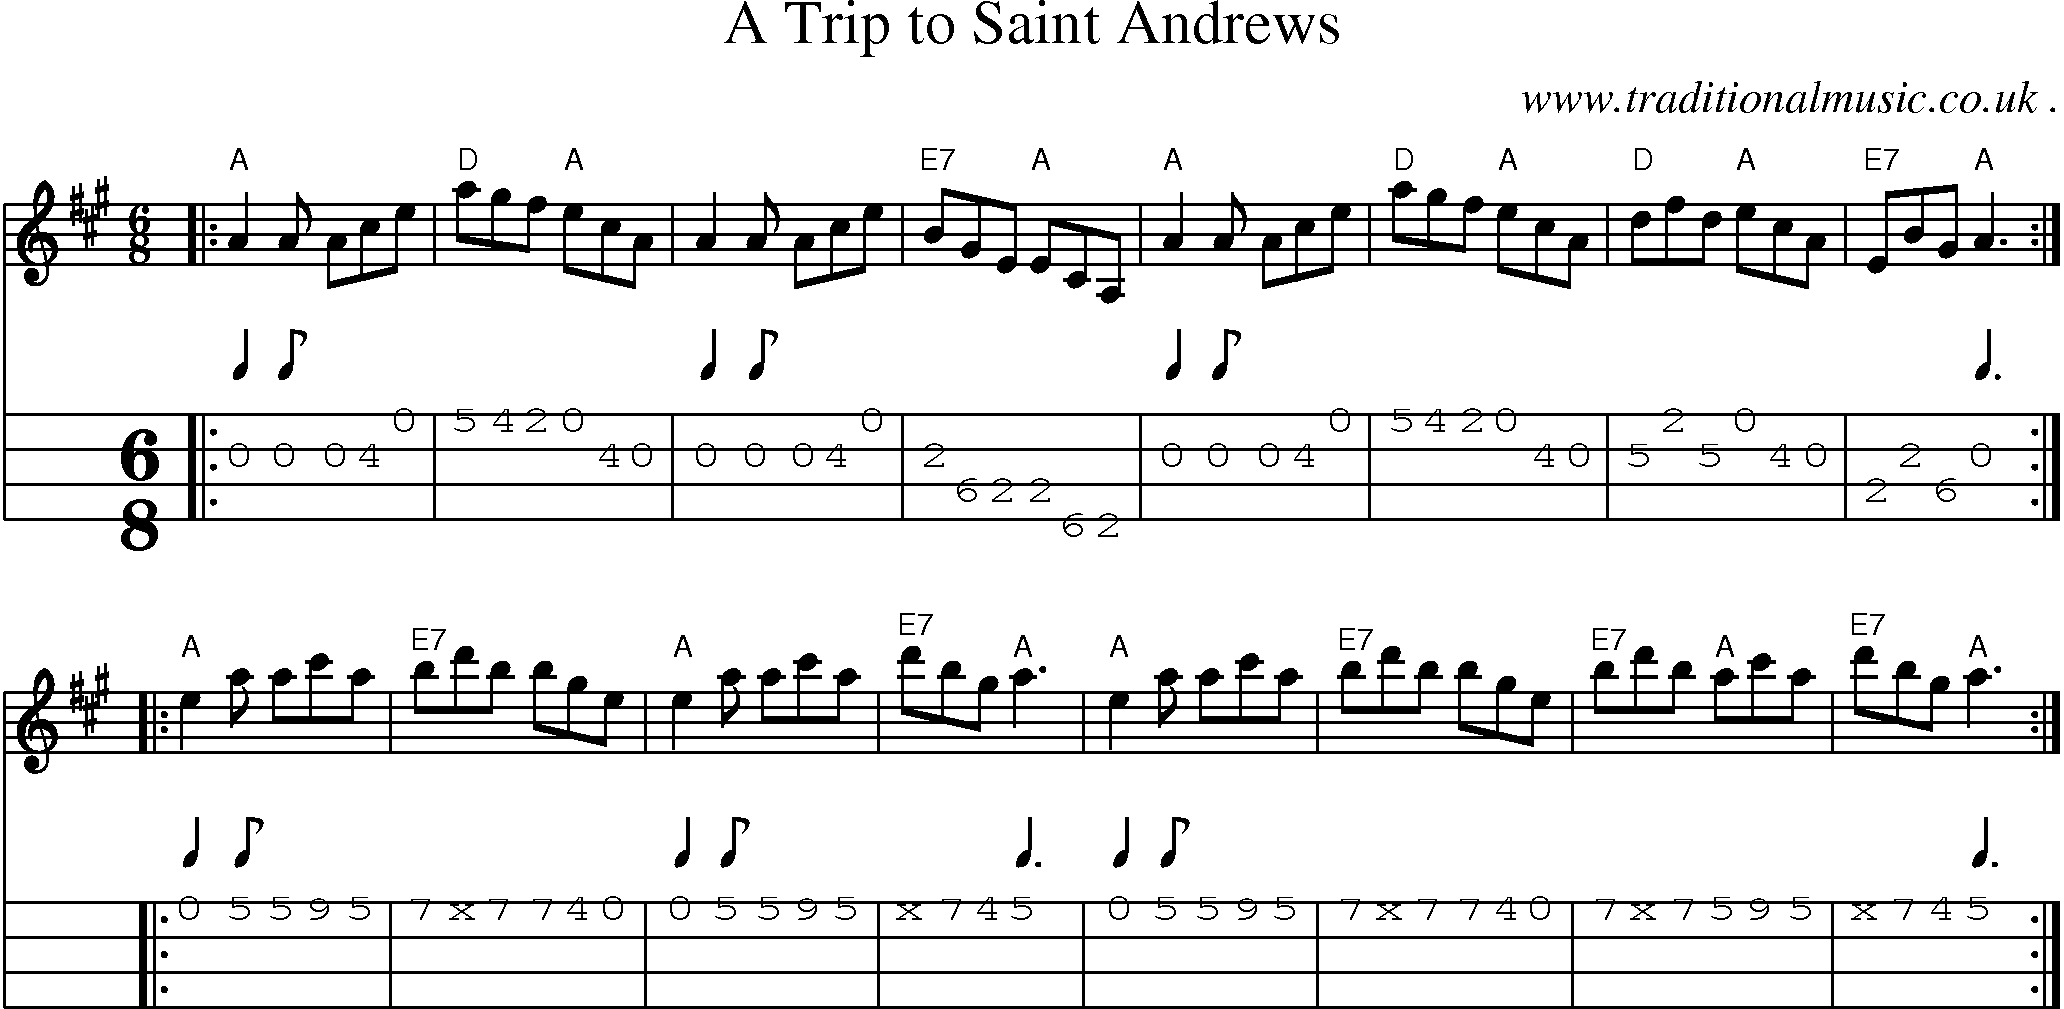 Sheet-music  score, Chords and Mandolin Tabs for A Trip To Saint Andrews